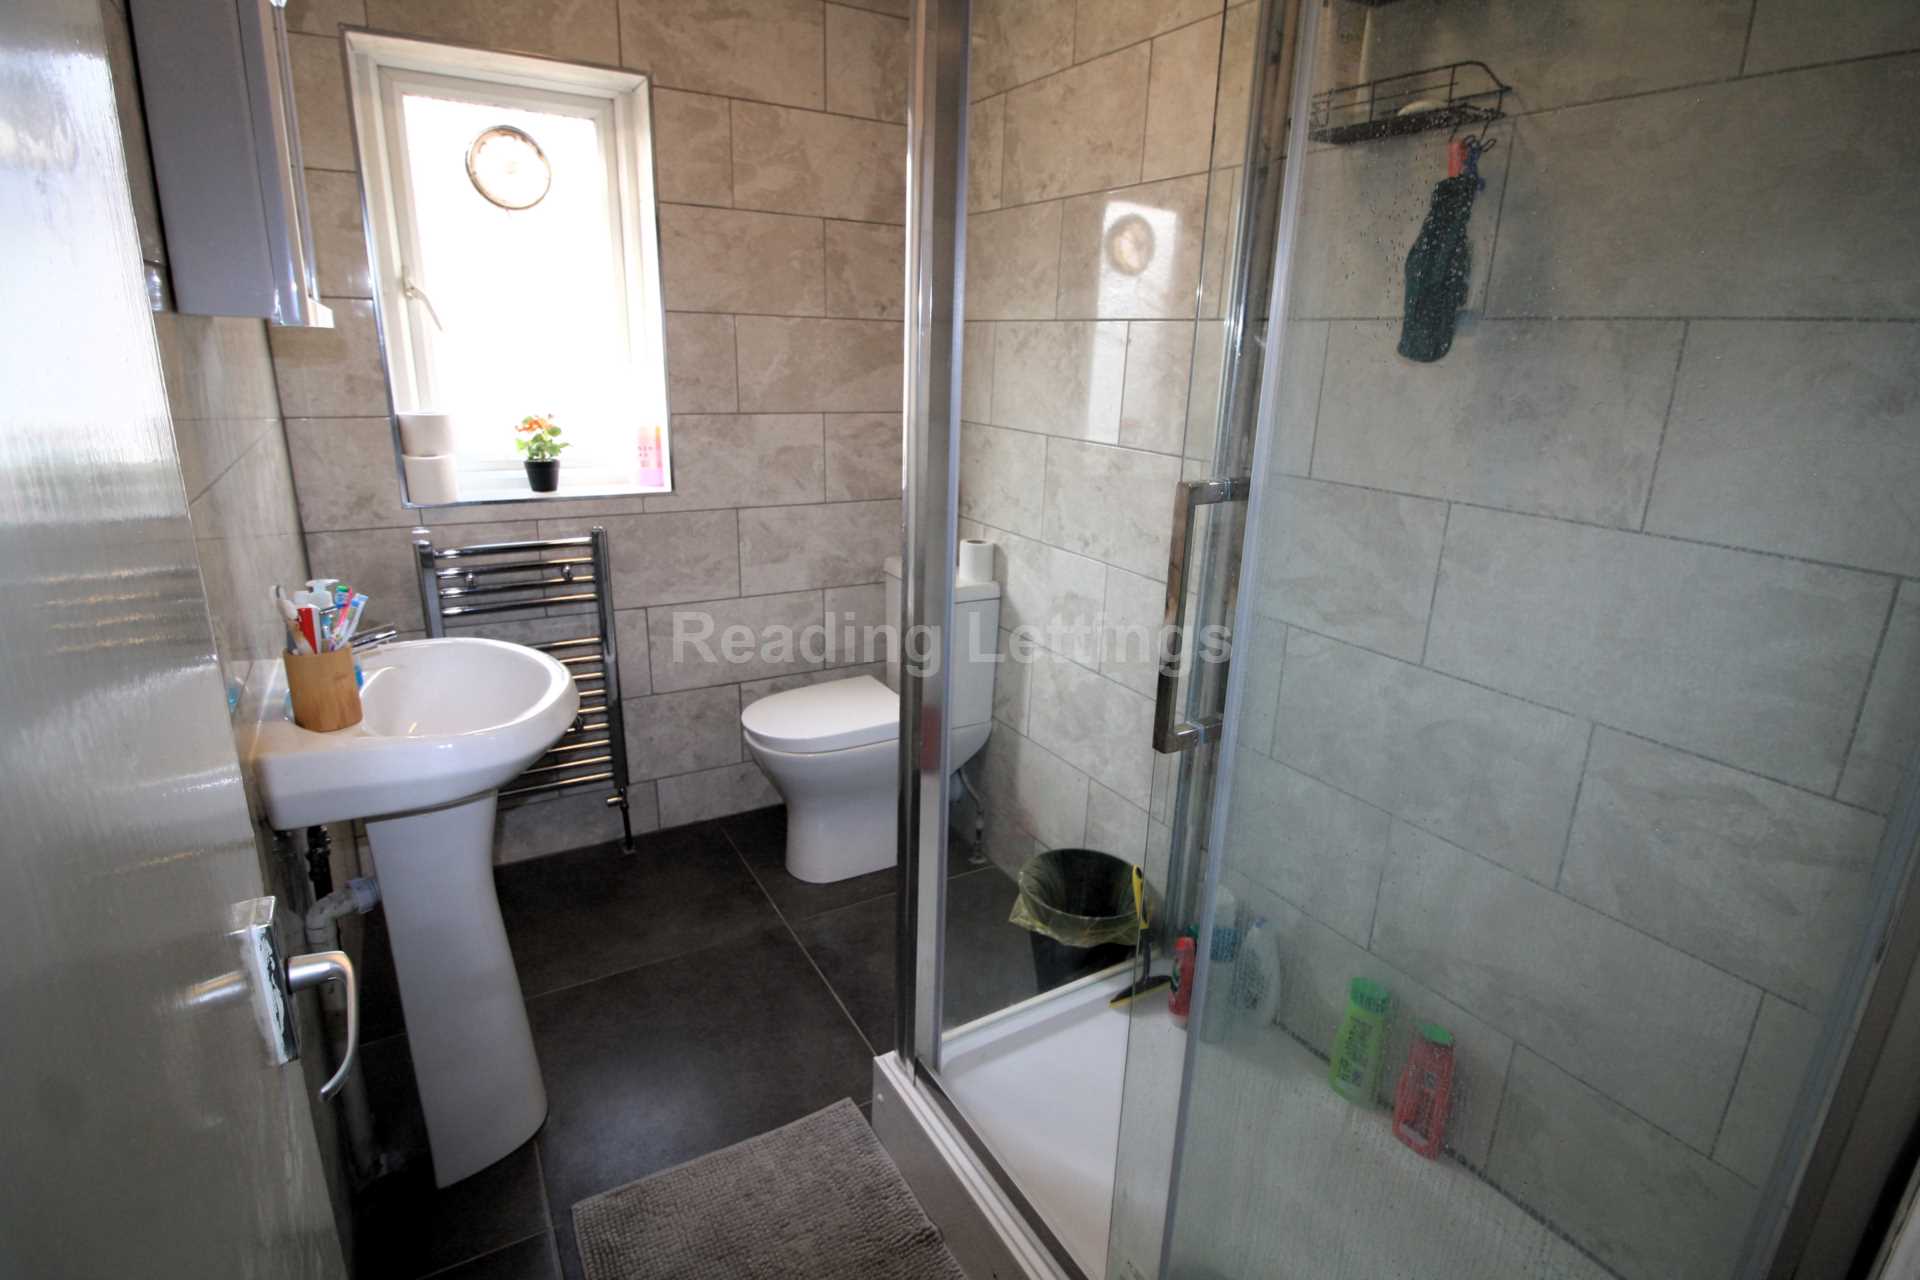 Blenheim Road, Reading - GAS INCLUDED, Image 10